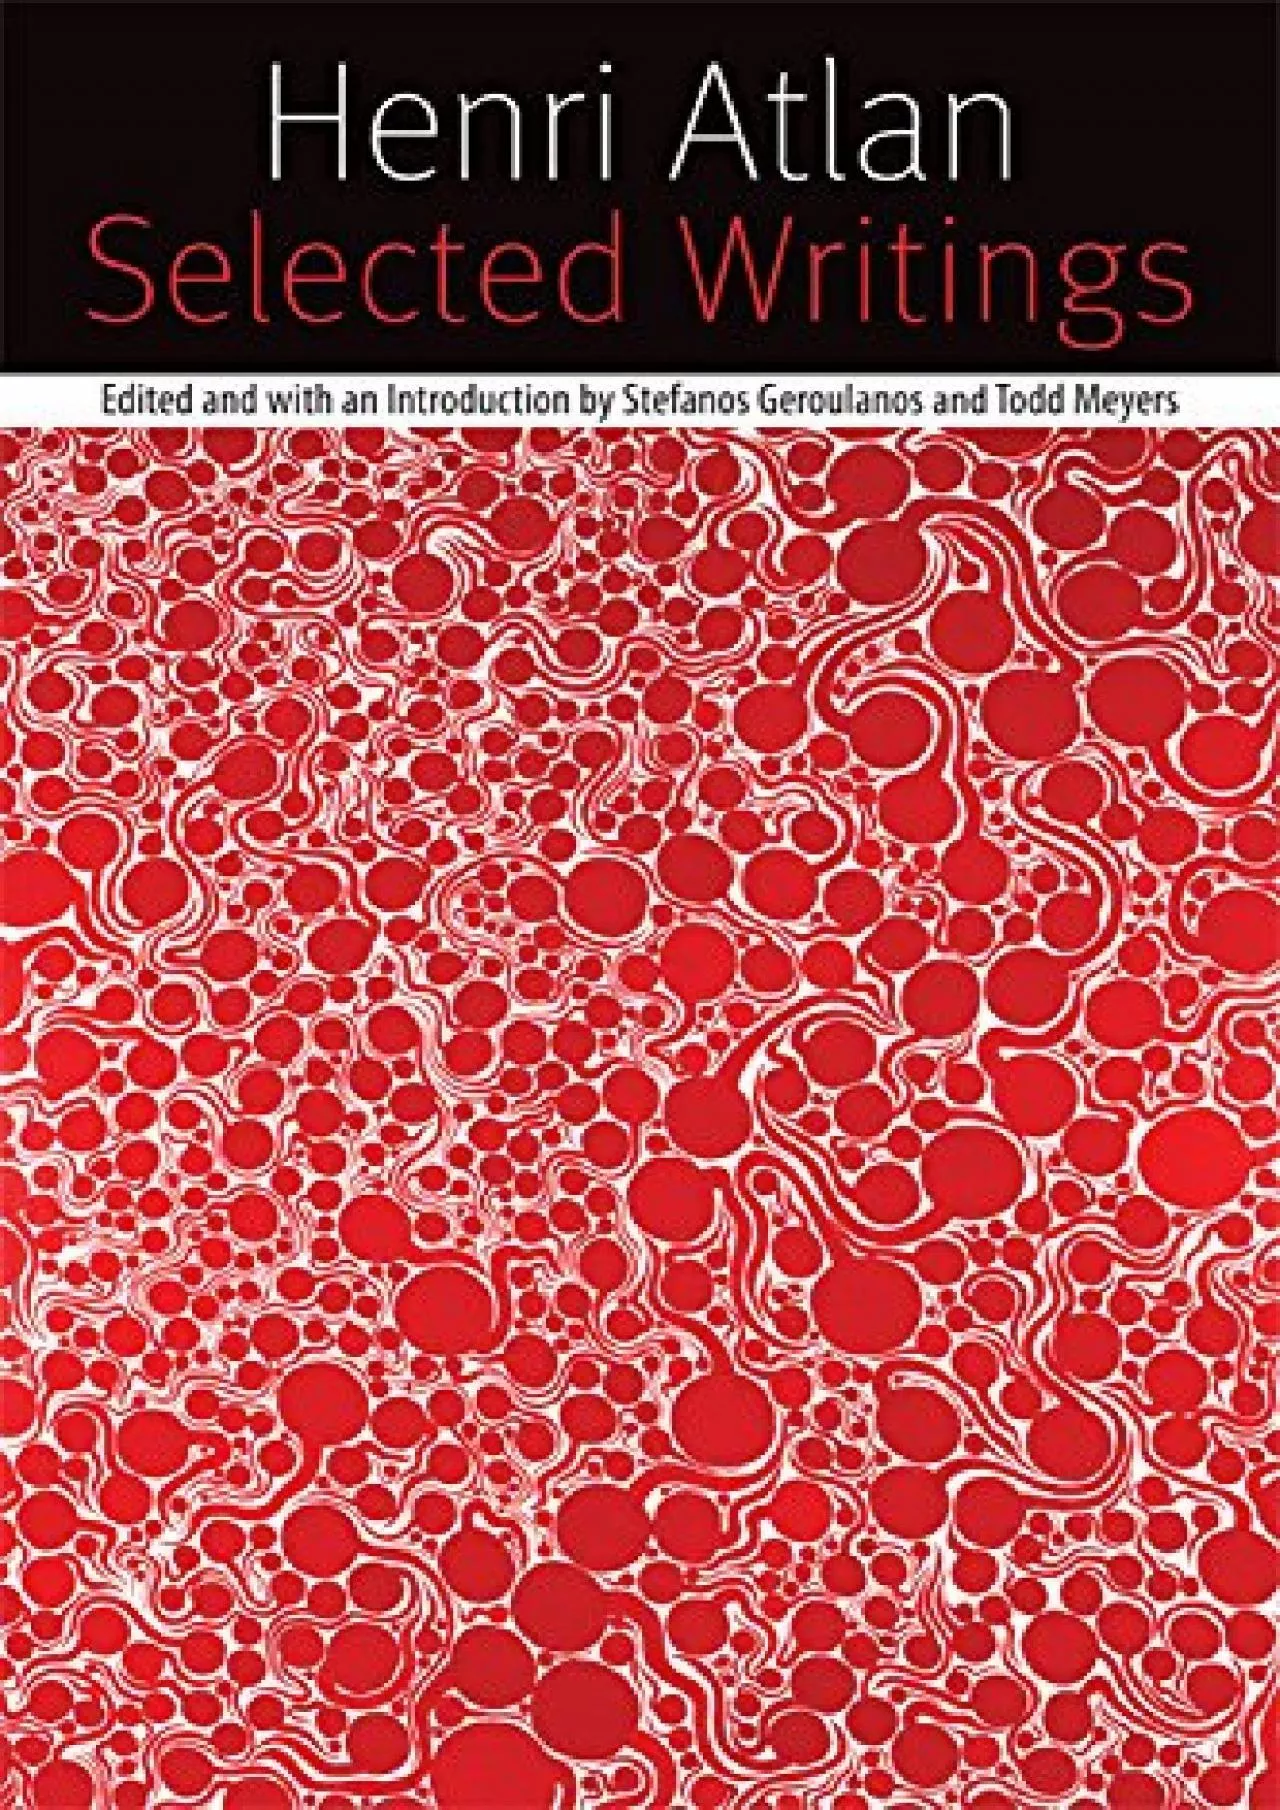 (DOWNLOAD)-Selected Writings: On Self-Organization, Philosophy, Bioethics, and Judaism